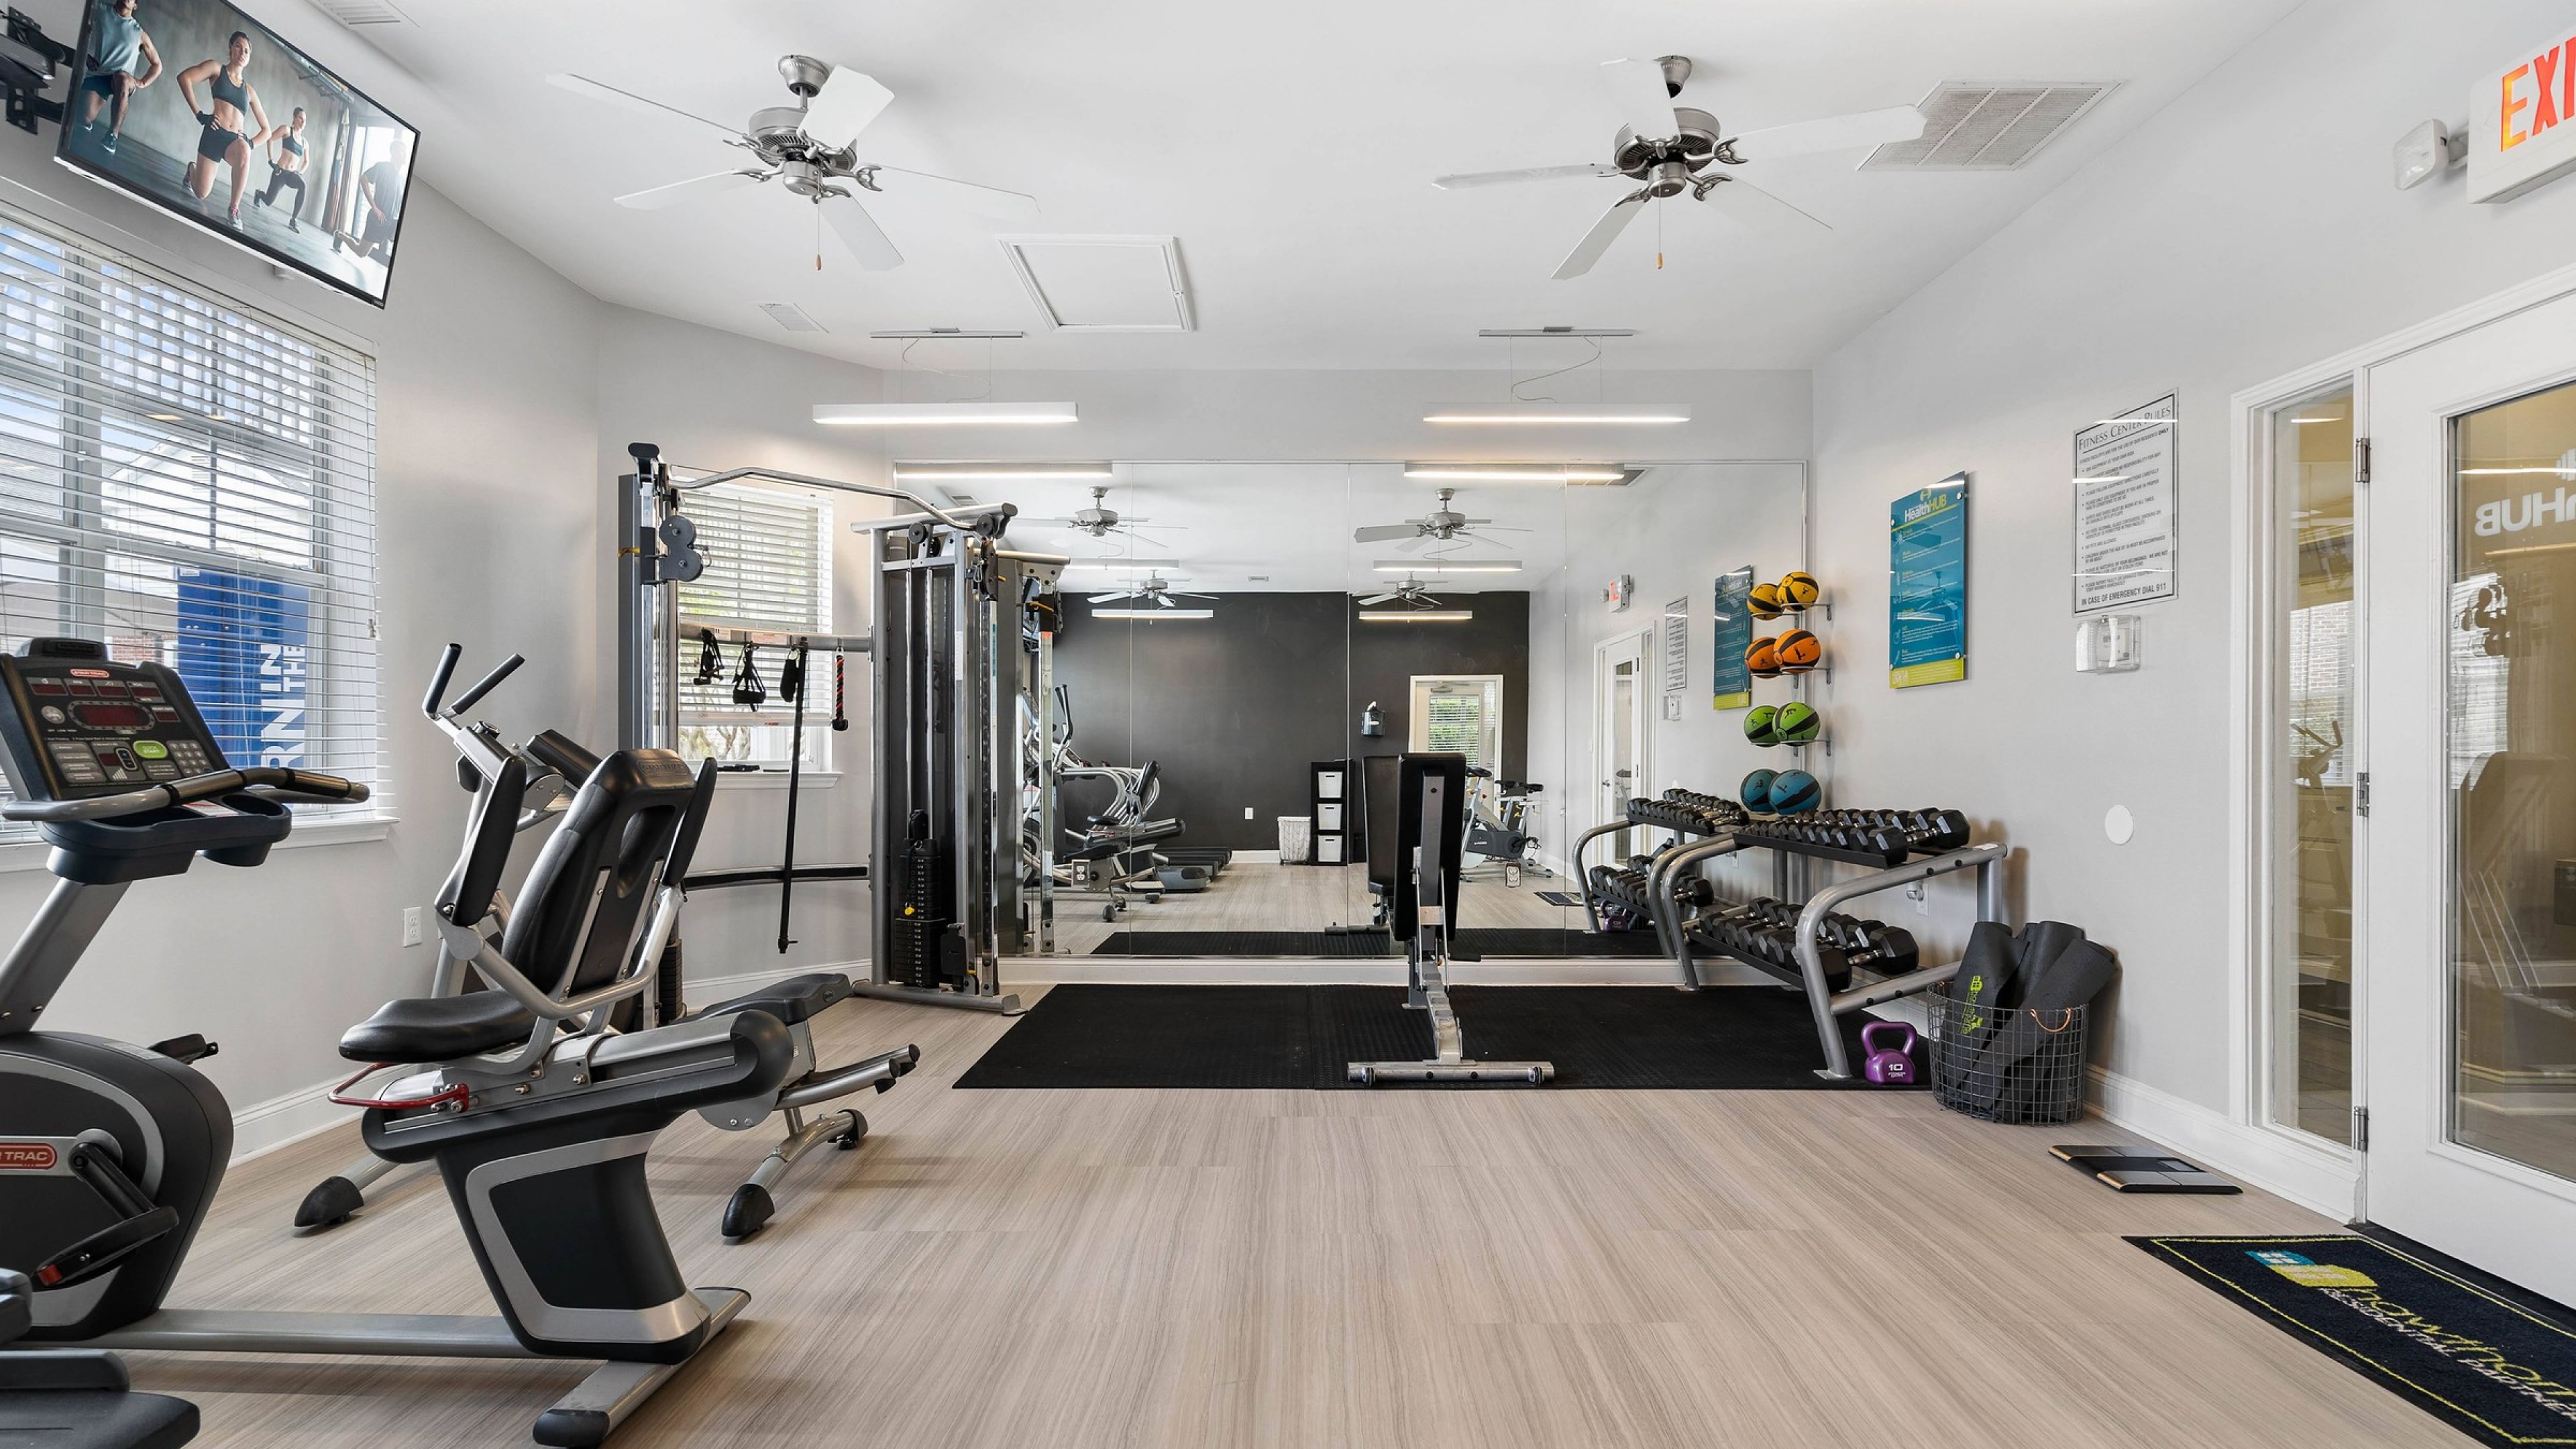 Hawthorne at Main resident fitness center amenity with cardio machines and tvs